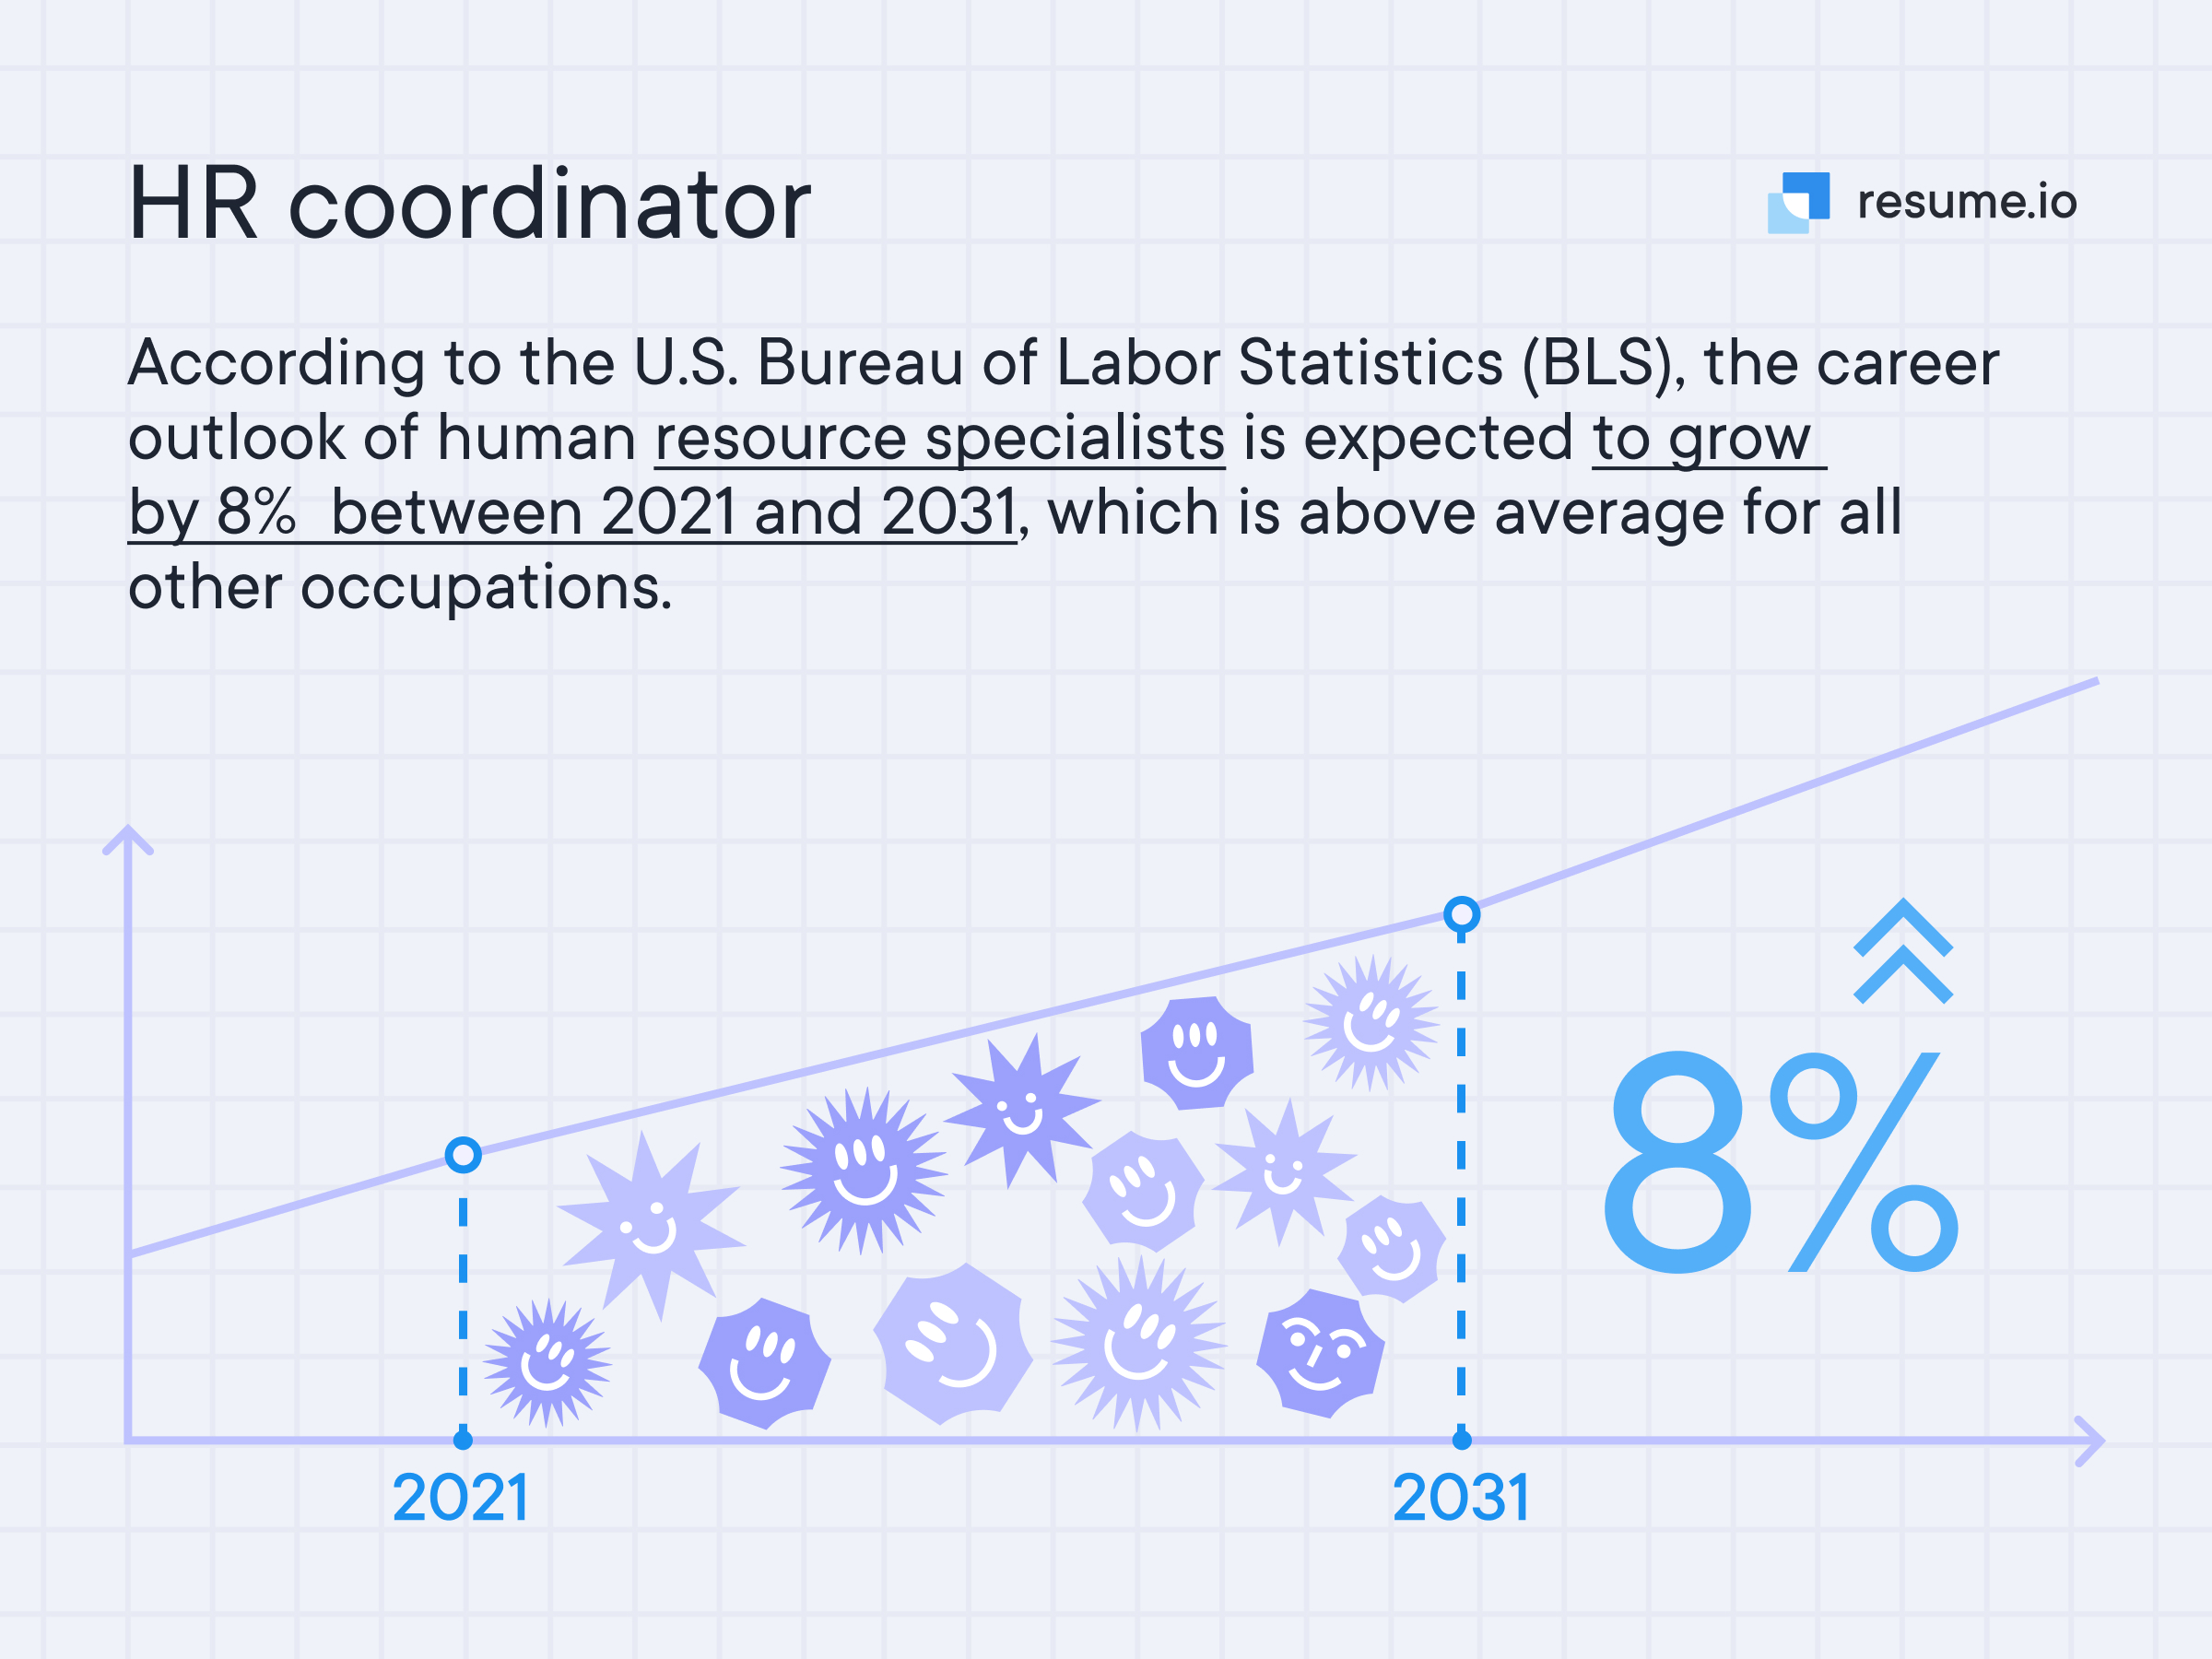 The career outlook of human resource specialists is expected to grow by 8% between 2021 and 2031